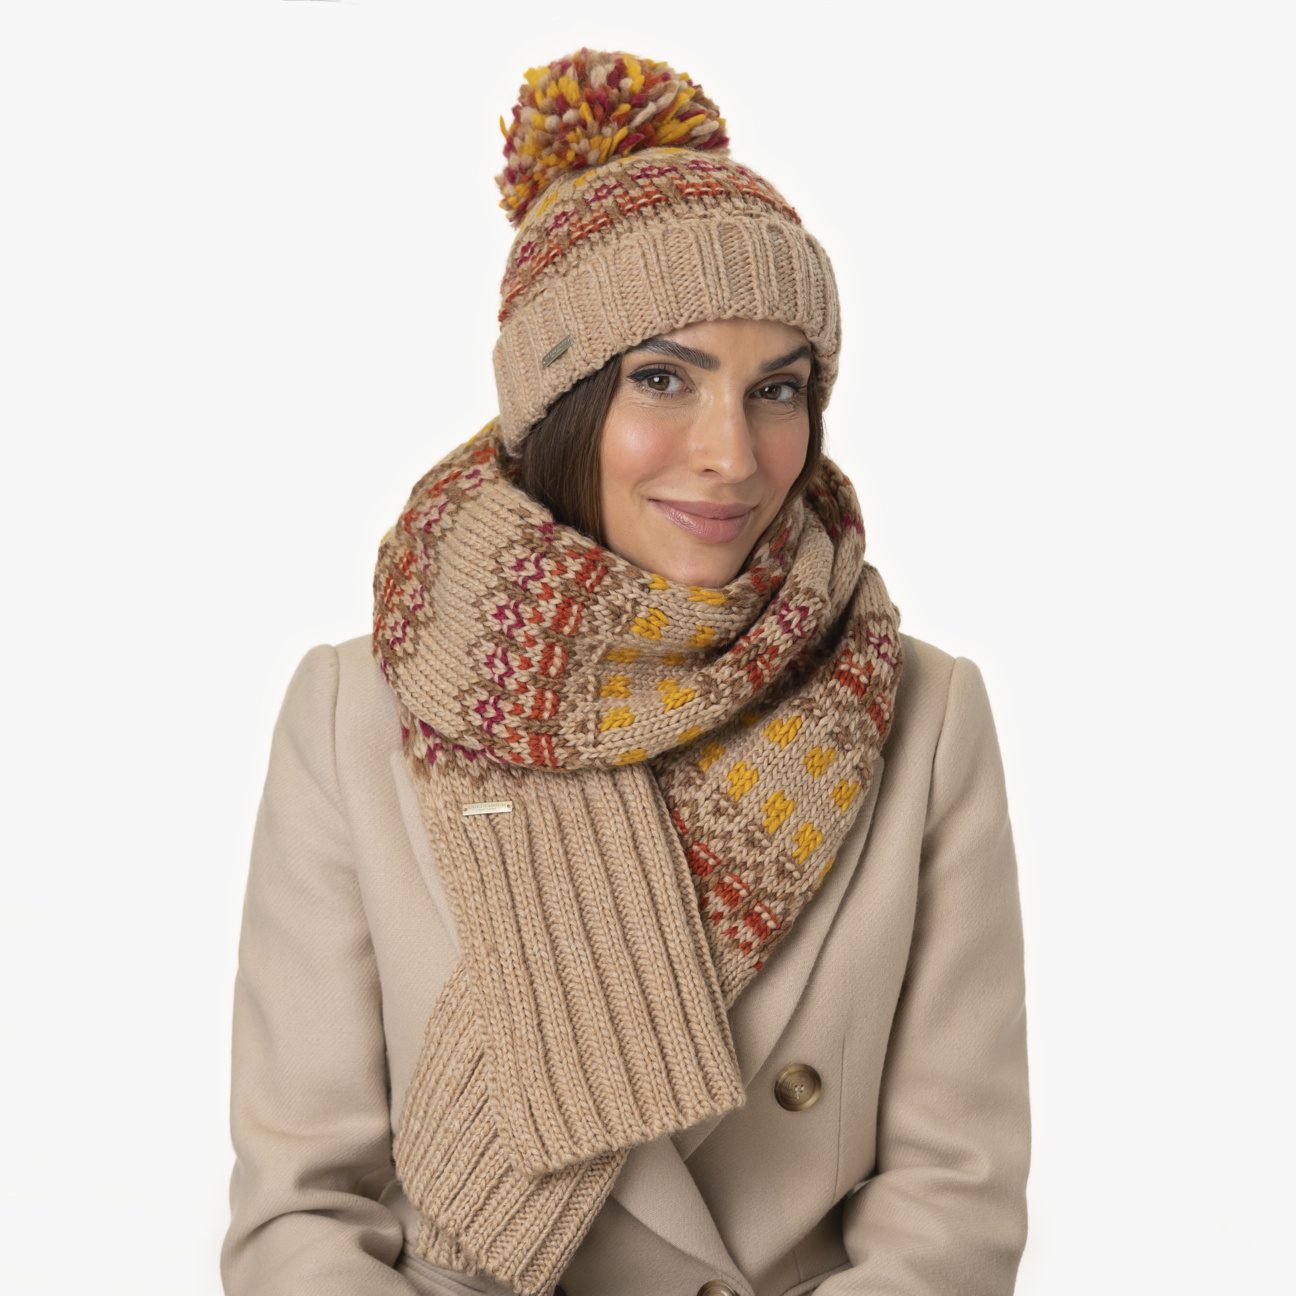 Salevia Multicolour Knit Scarf by Seeberger - 53,95 €